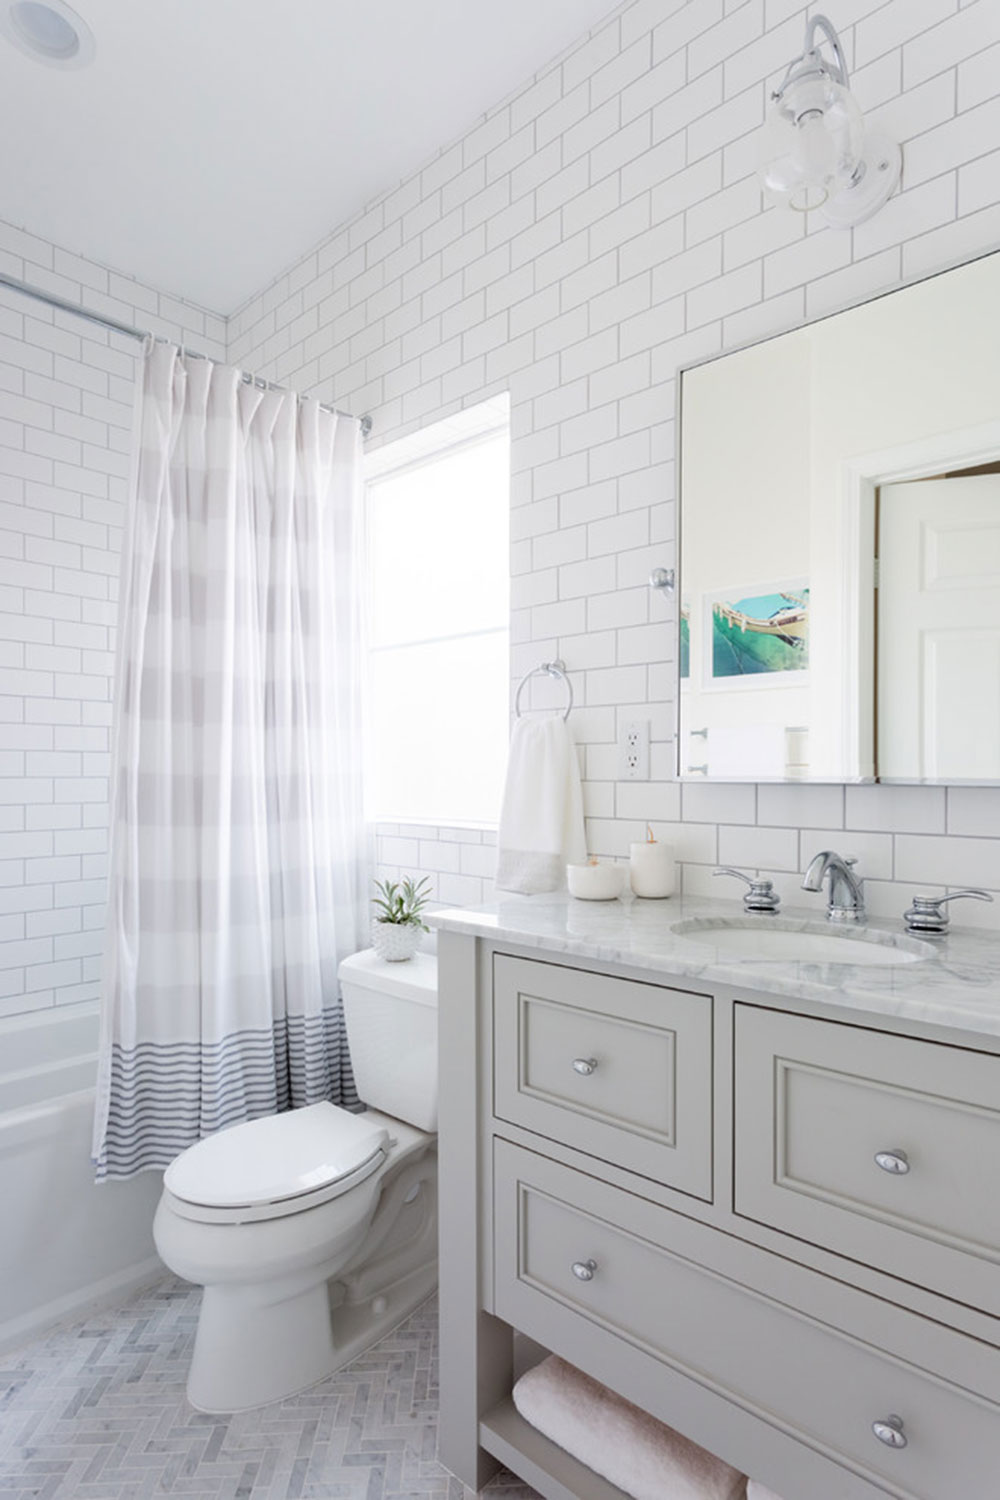 Kiyot-Way-Remodel-by-Marissa-Cramer-Interiors The definitive guide on how to decorate a bathroom